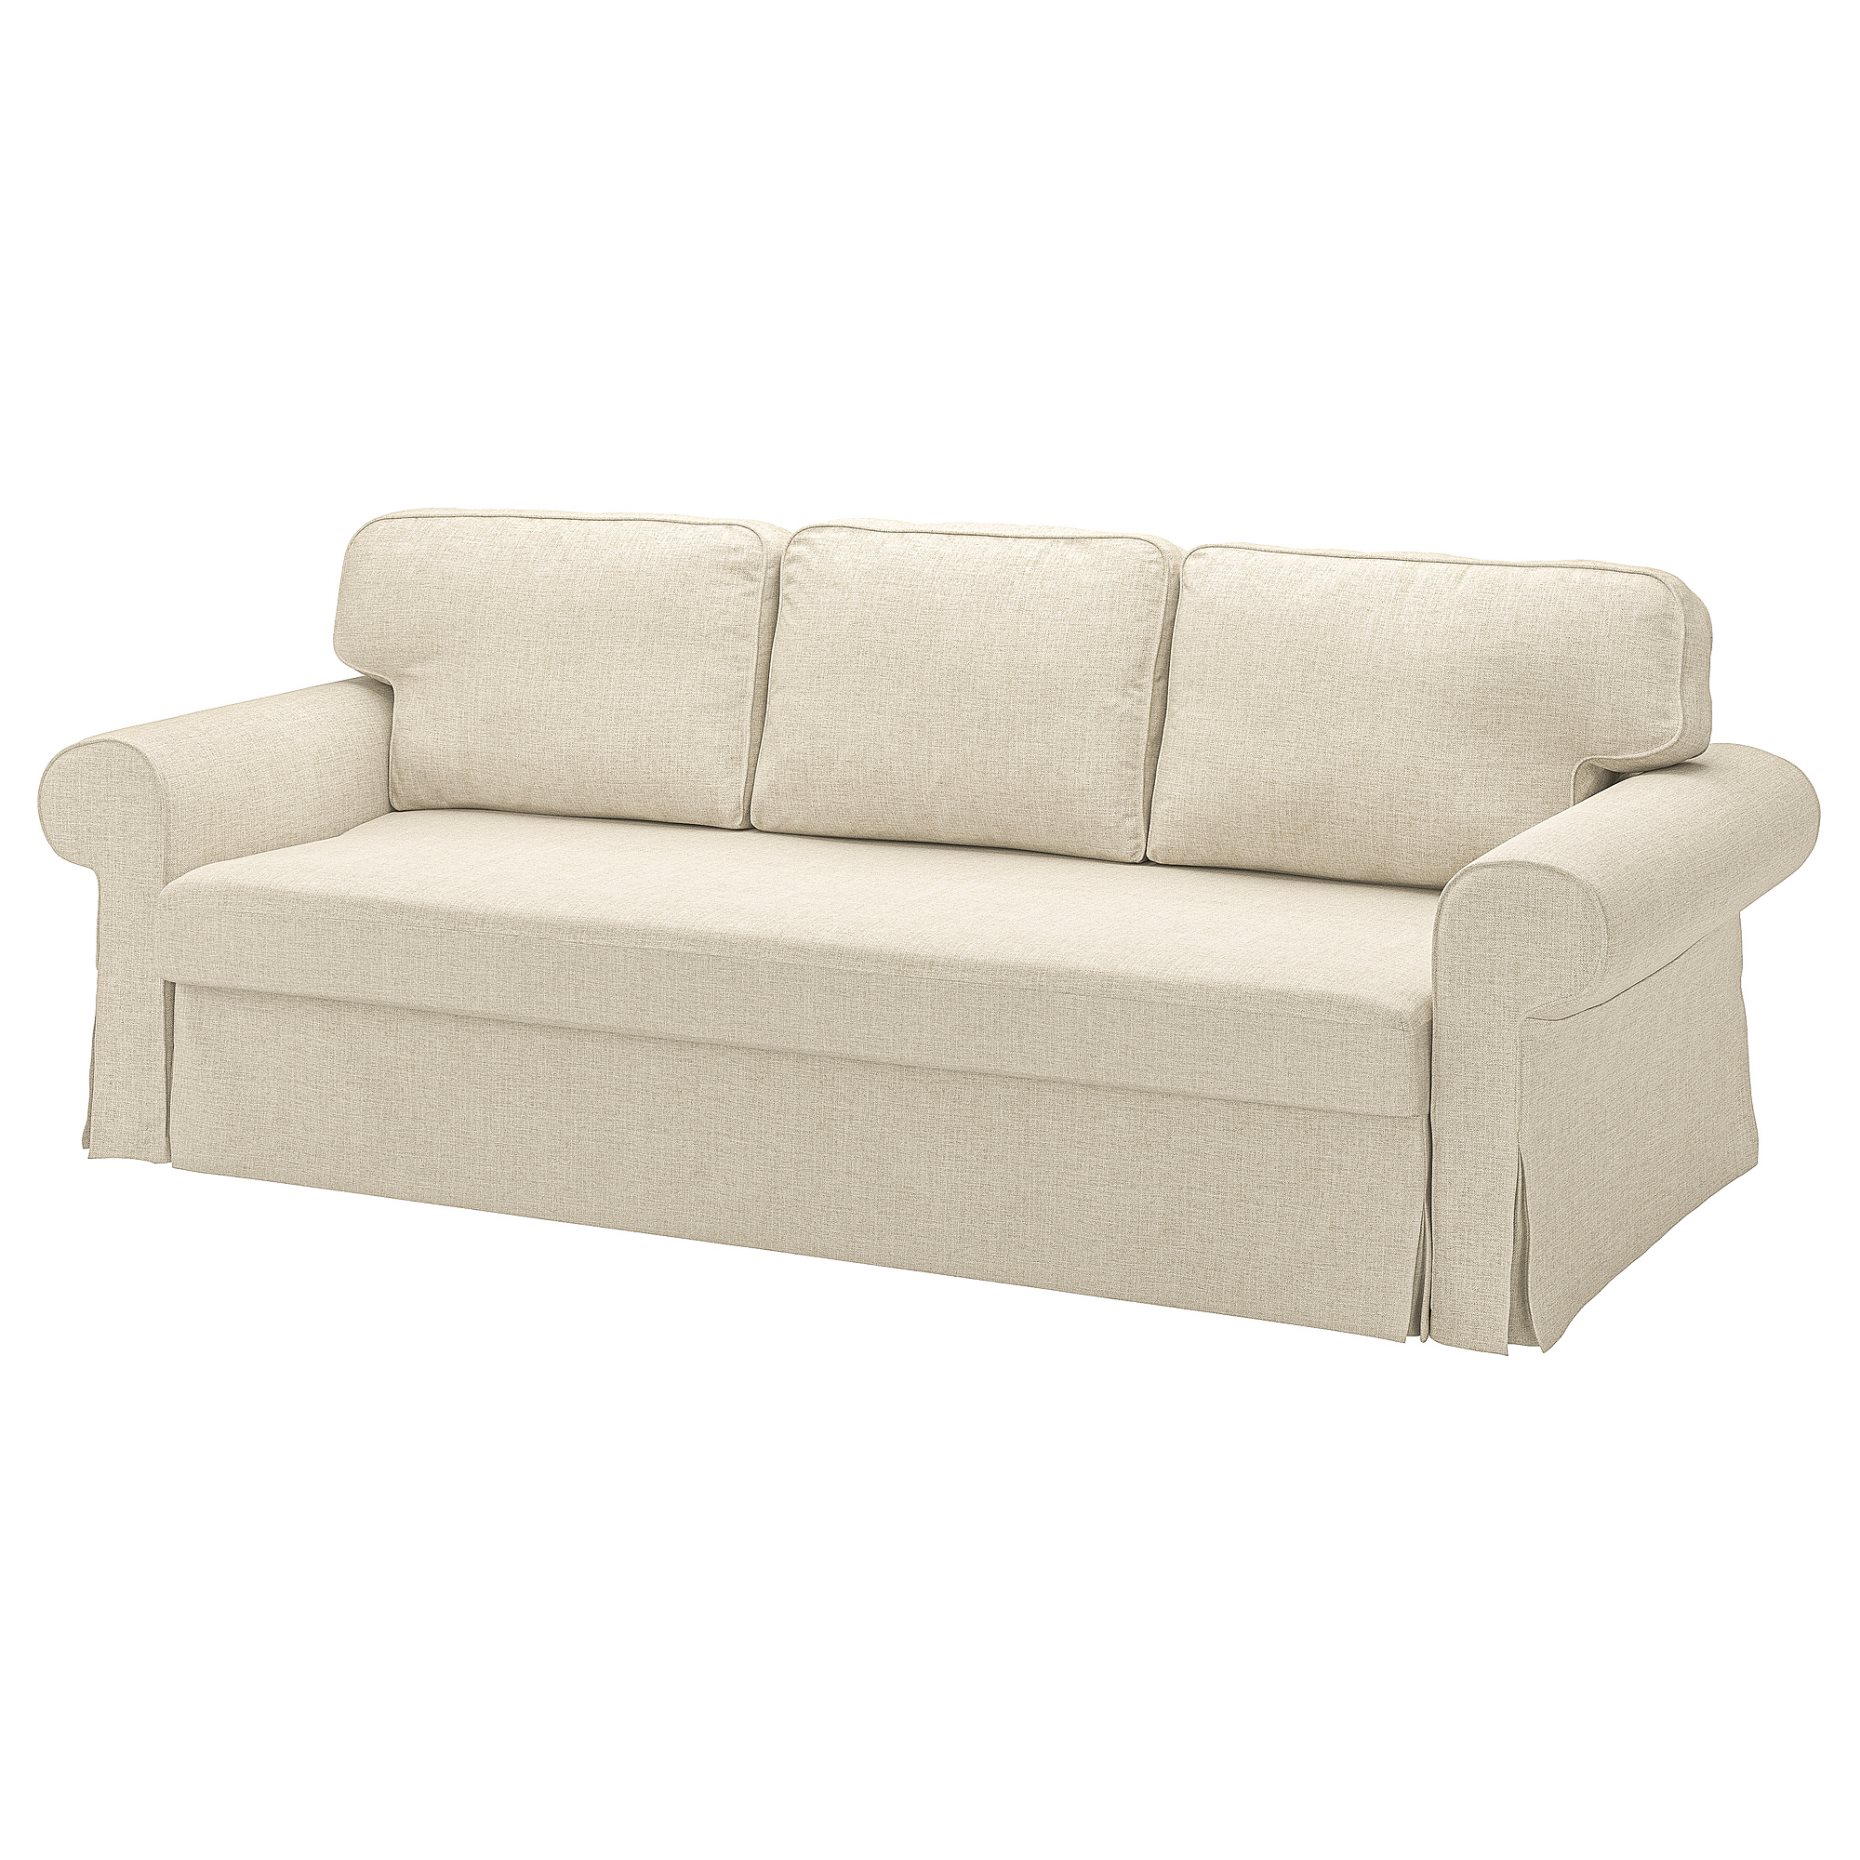 VRETSTORP, cover for 3-seat sofa-bed, 905.451.86